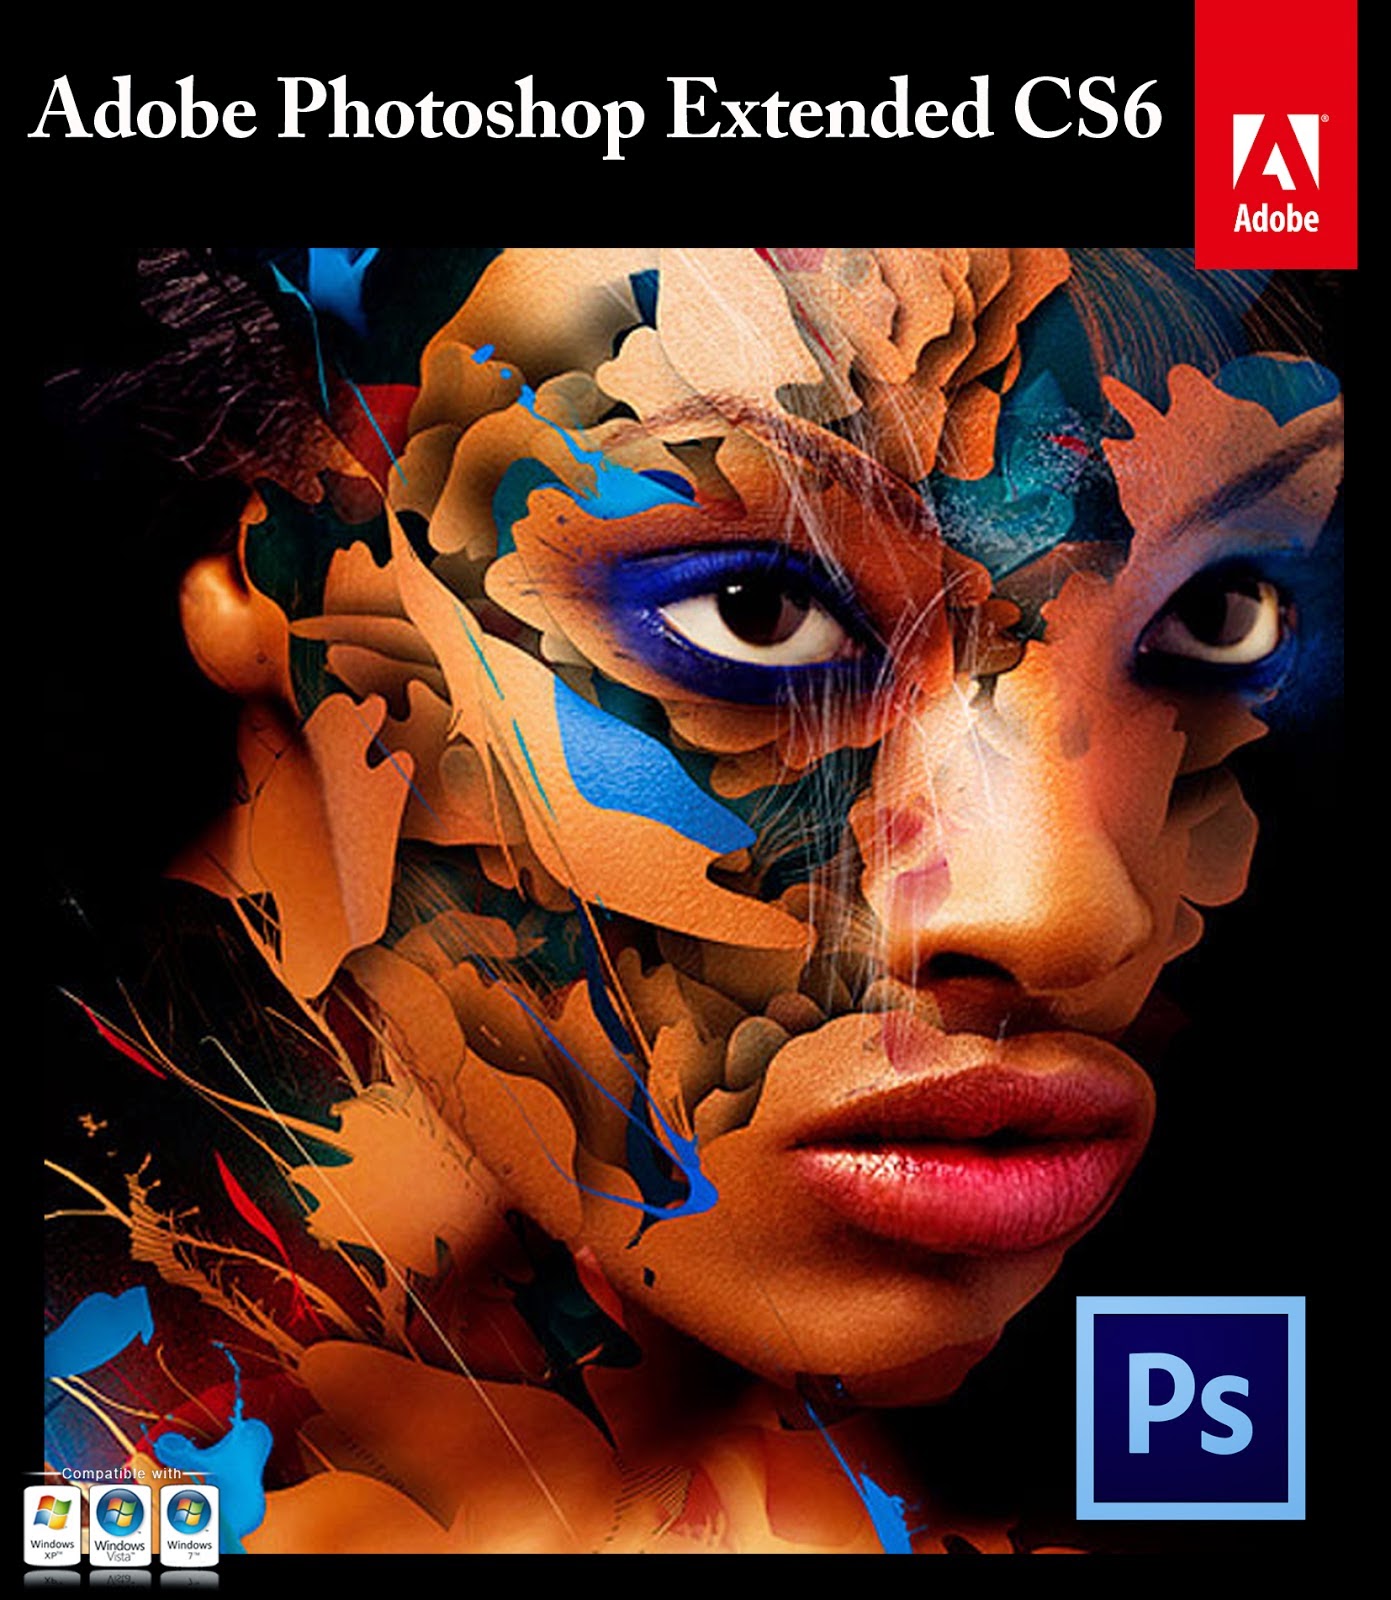 Adobe photoshop cs6 extended download free mac os